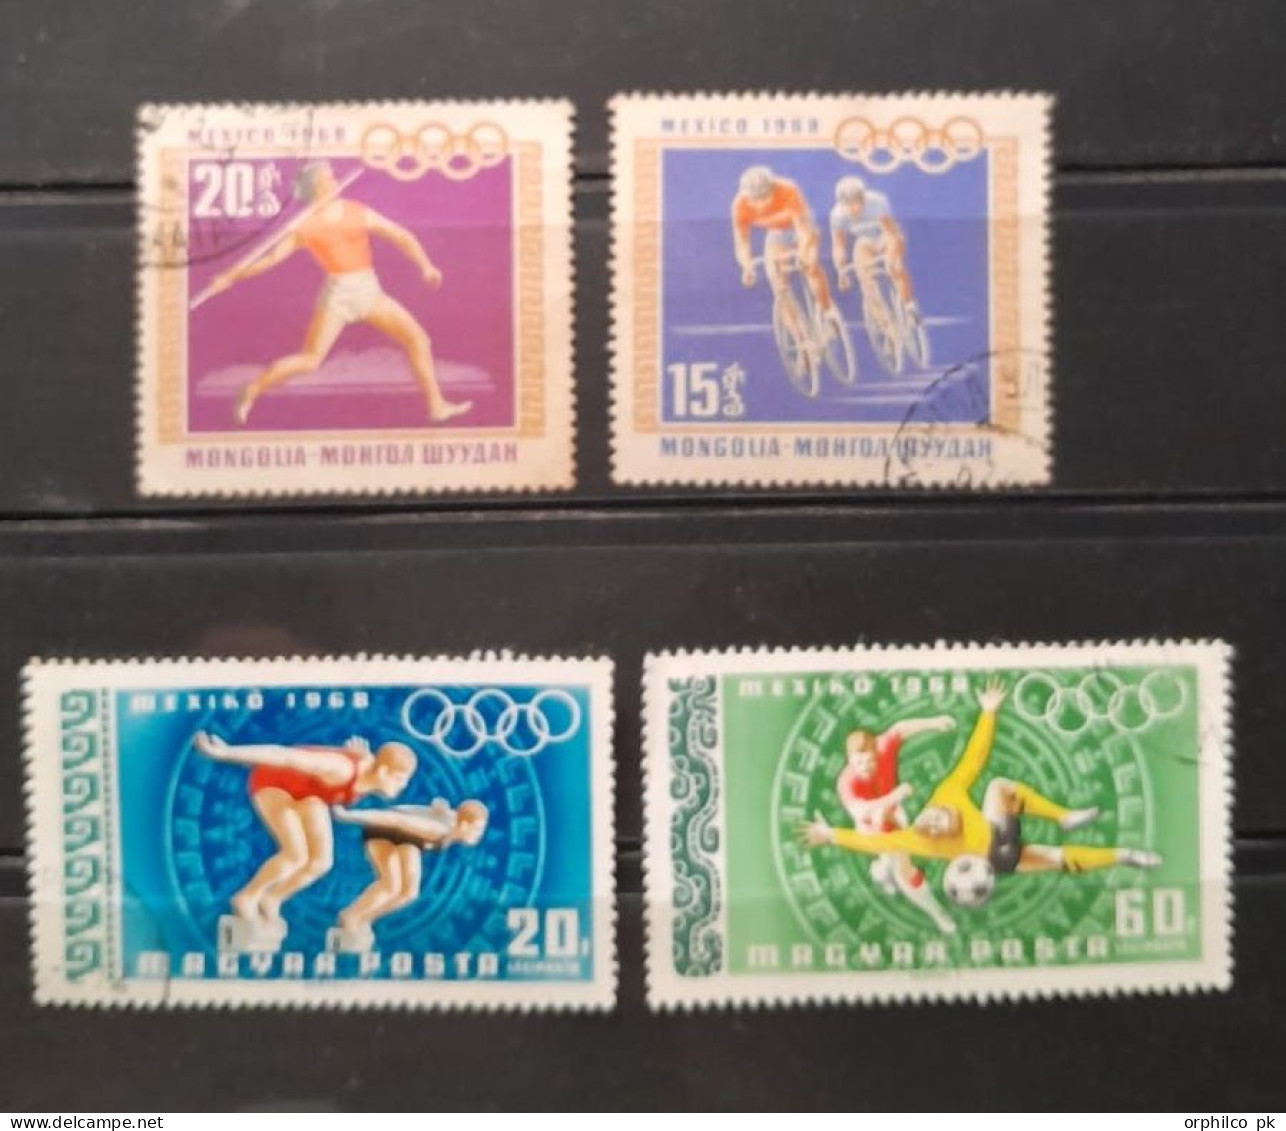 MEXICO CITY Olympic 1968 USED Javelin Cycling Swiming Football Coccer Mongolia Hungery Gold Medal - Verano 1968: México